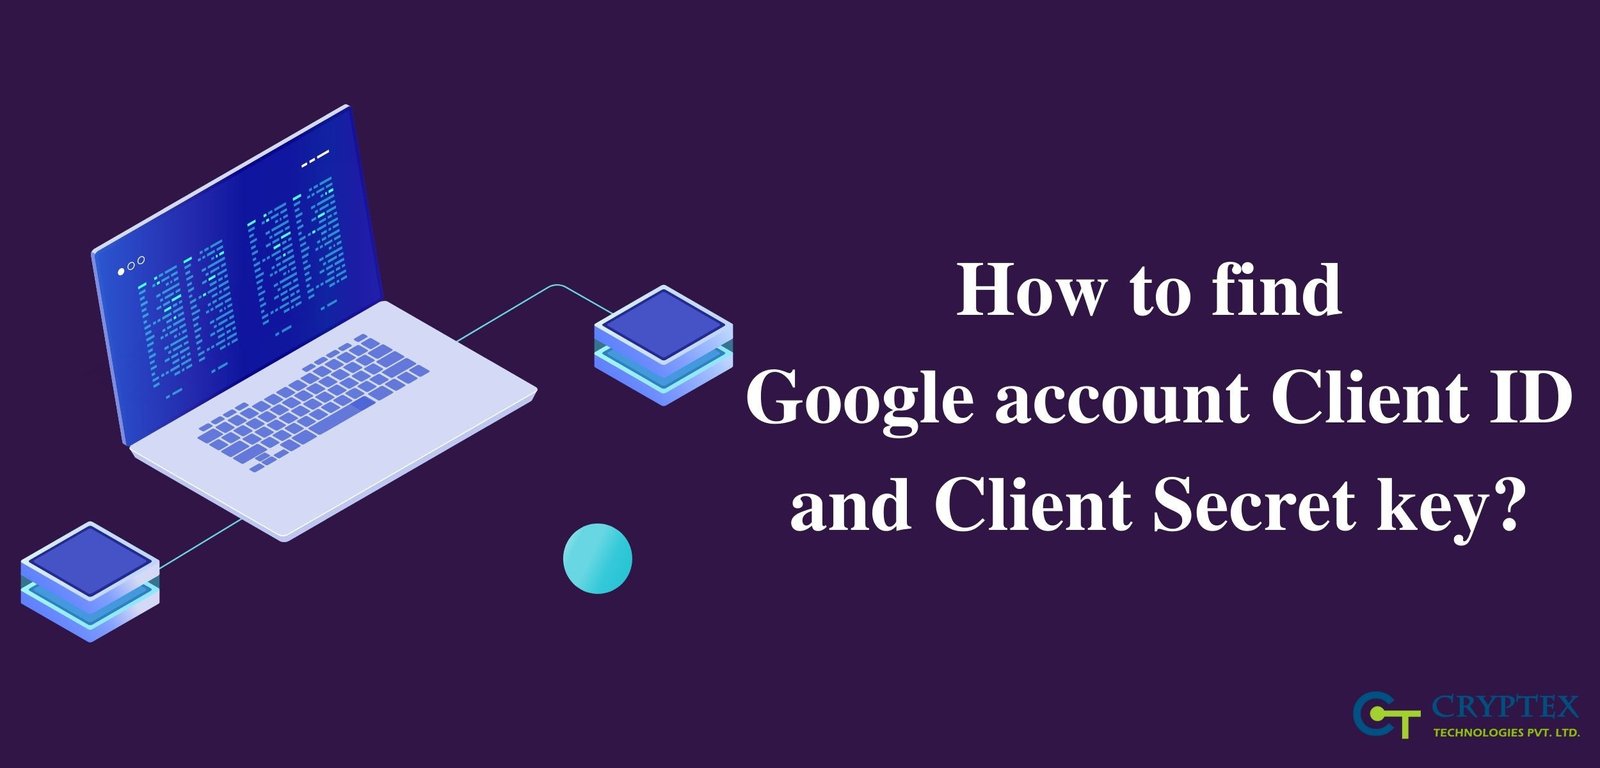 How To Find Google Account Client ID And Client Secret Key